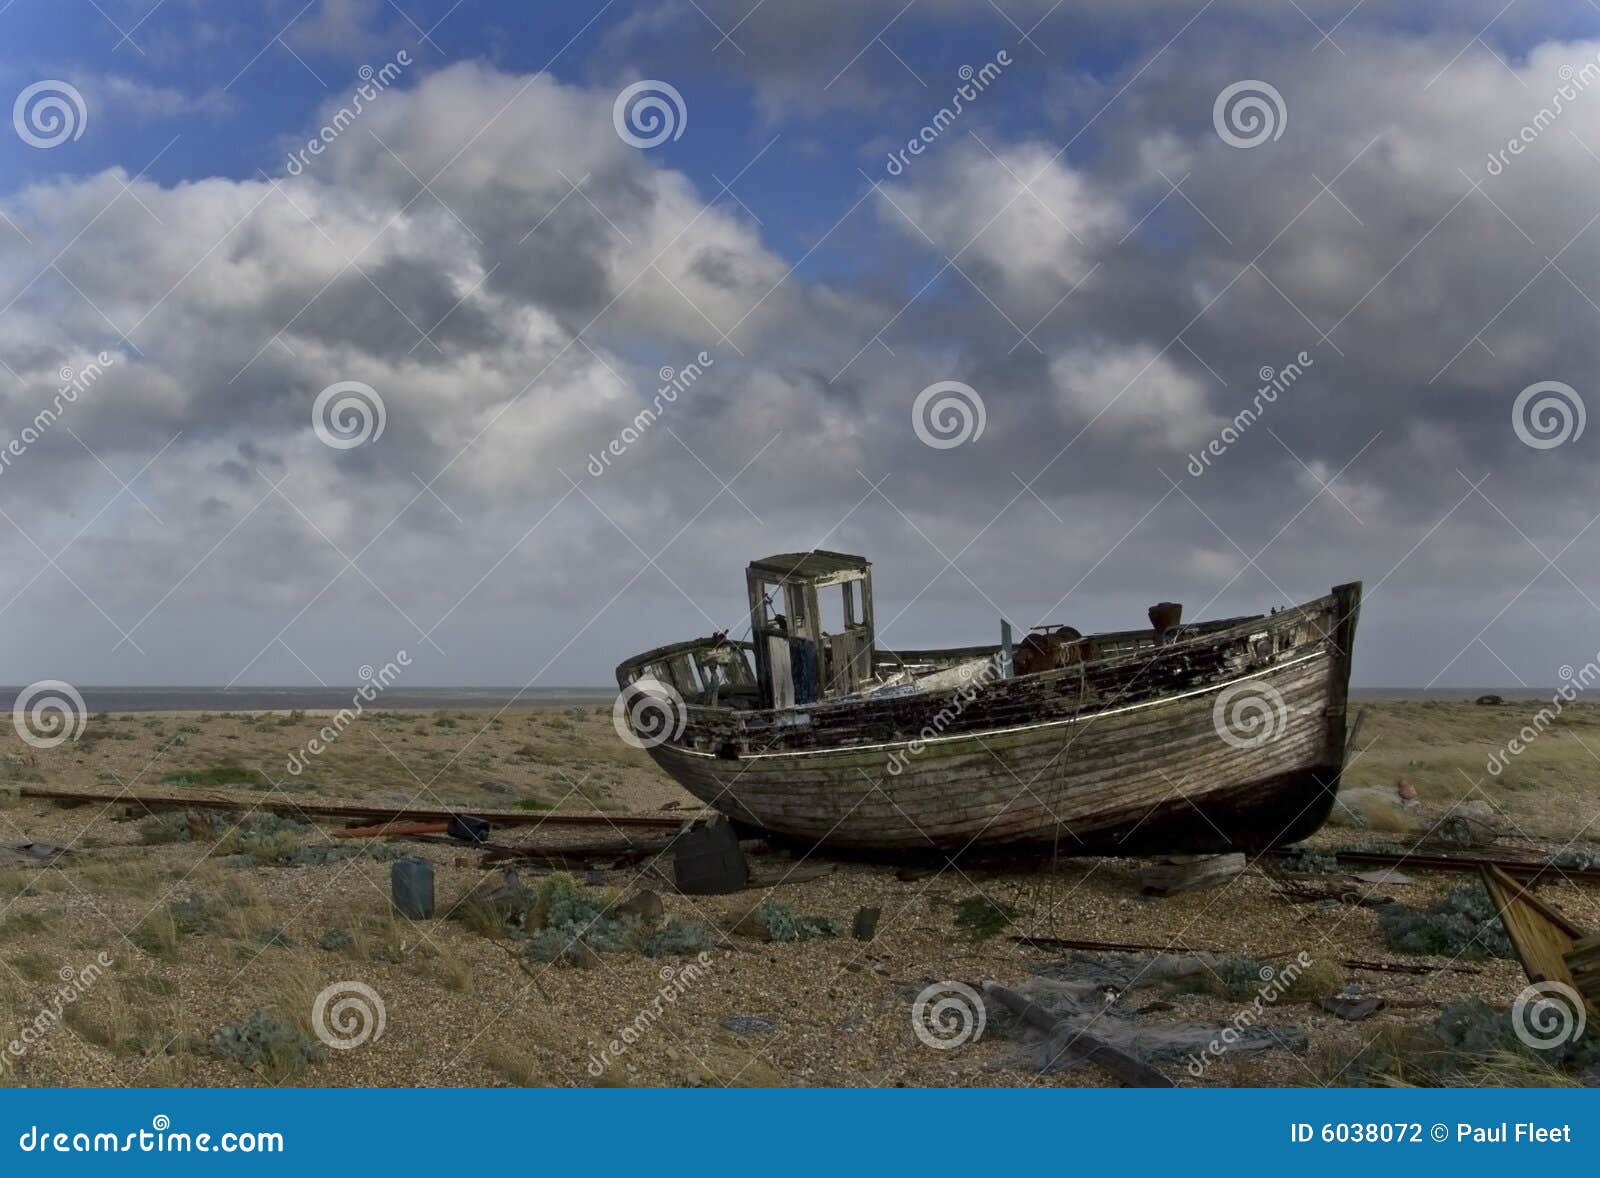 287 Old Broken Down Boat Stock Photos - Free & Royalty-Free Stock Photos  from Dreamstime